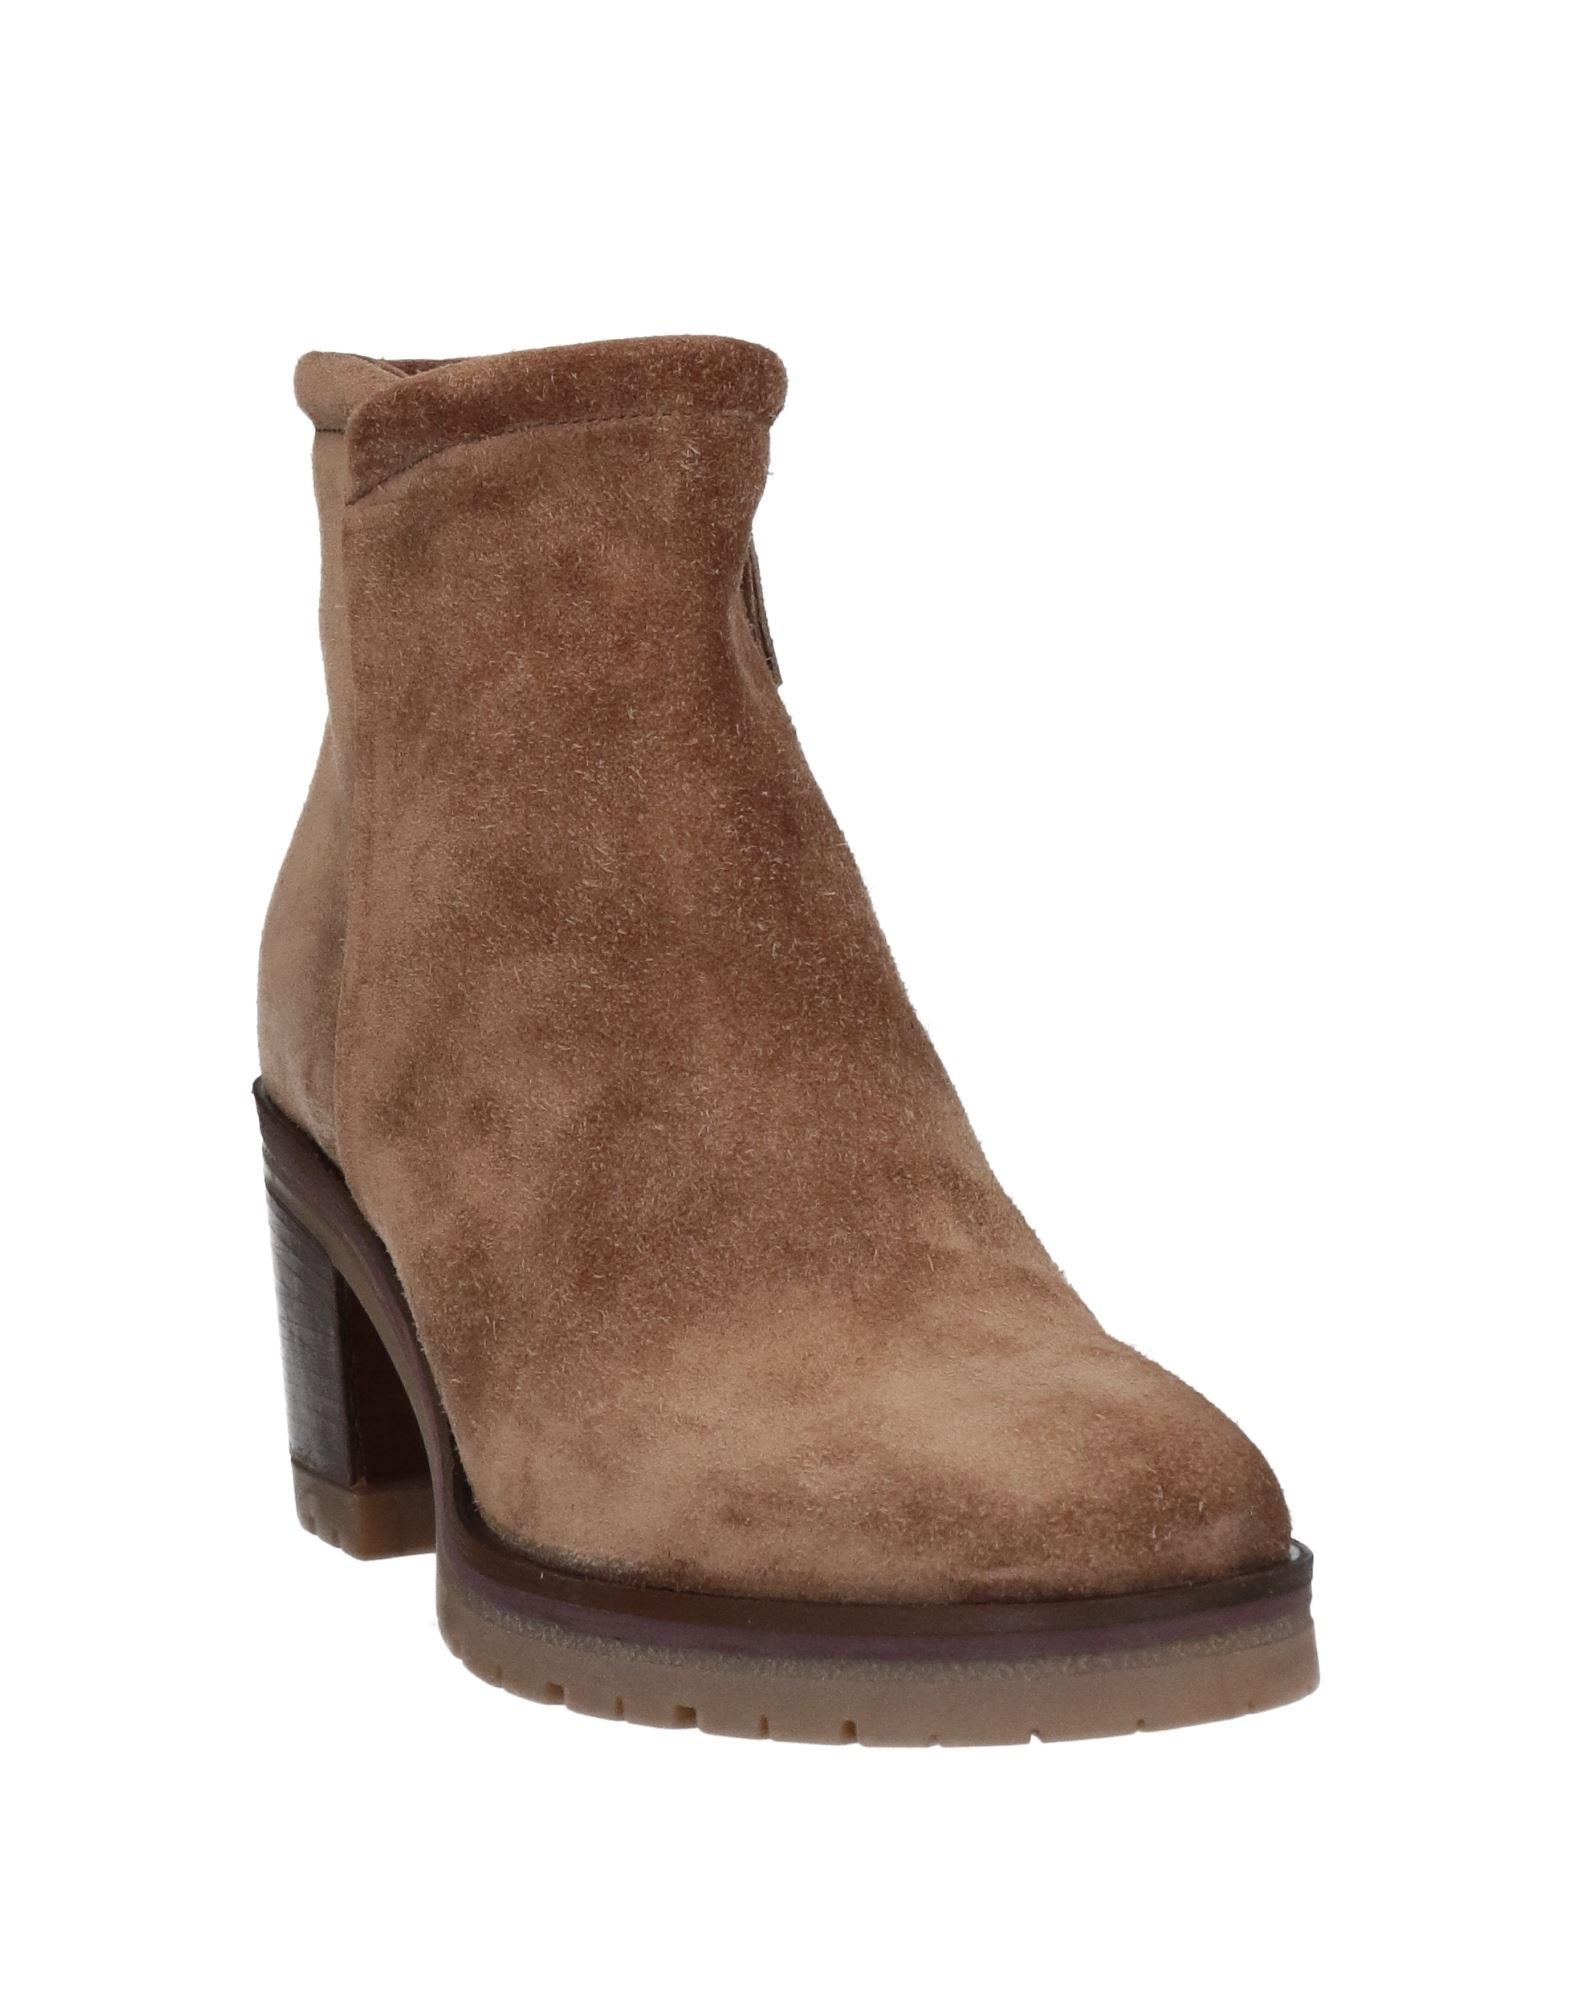 Triver Flight Ankle Boots in Natural | Lyst